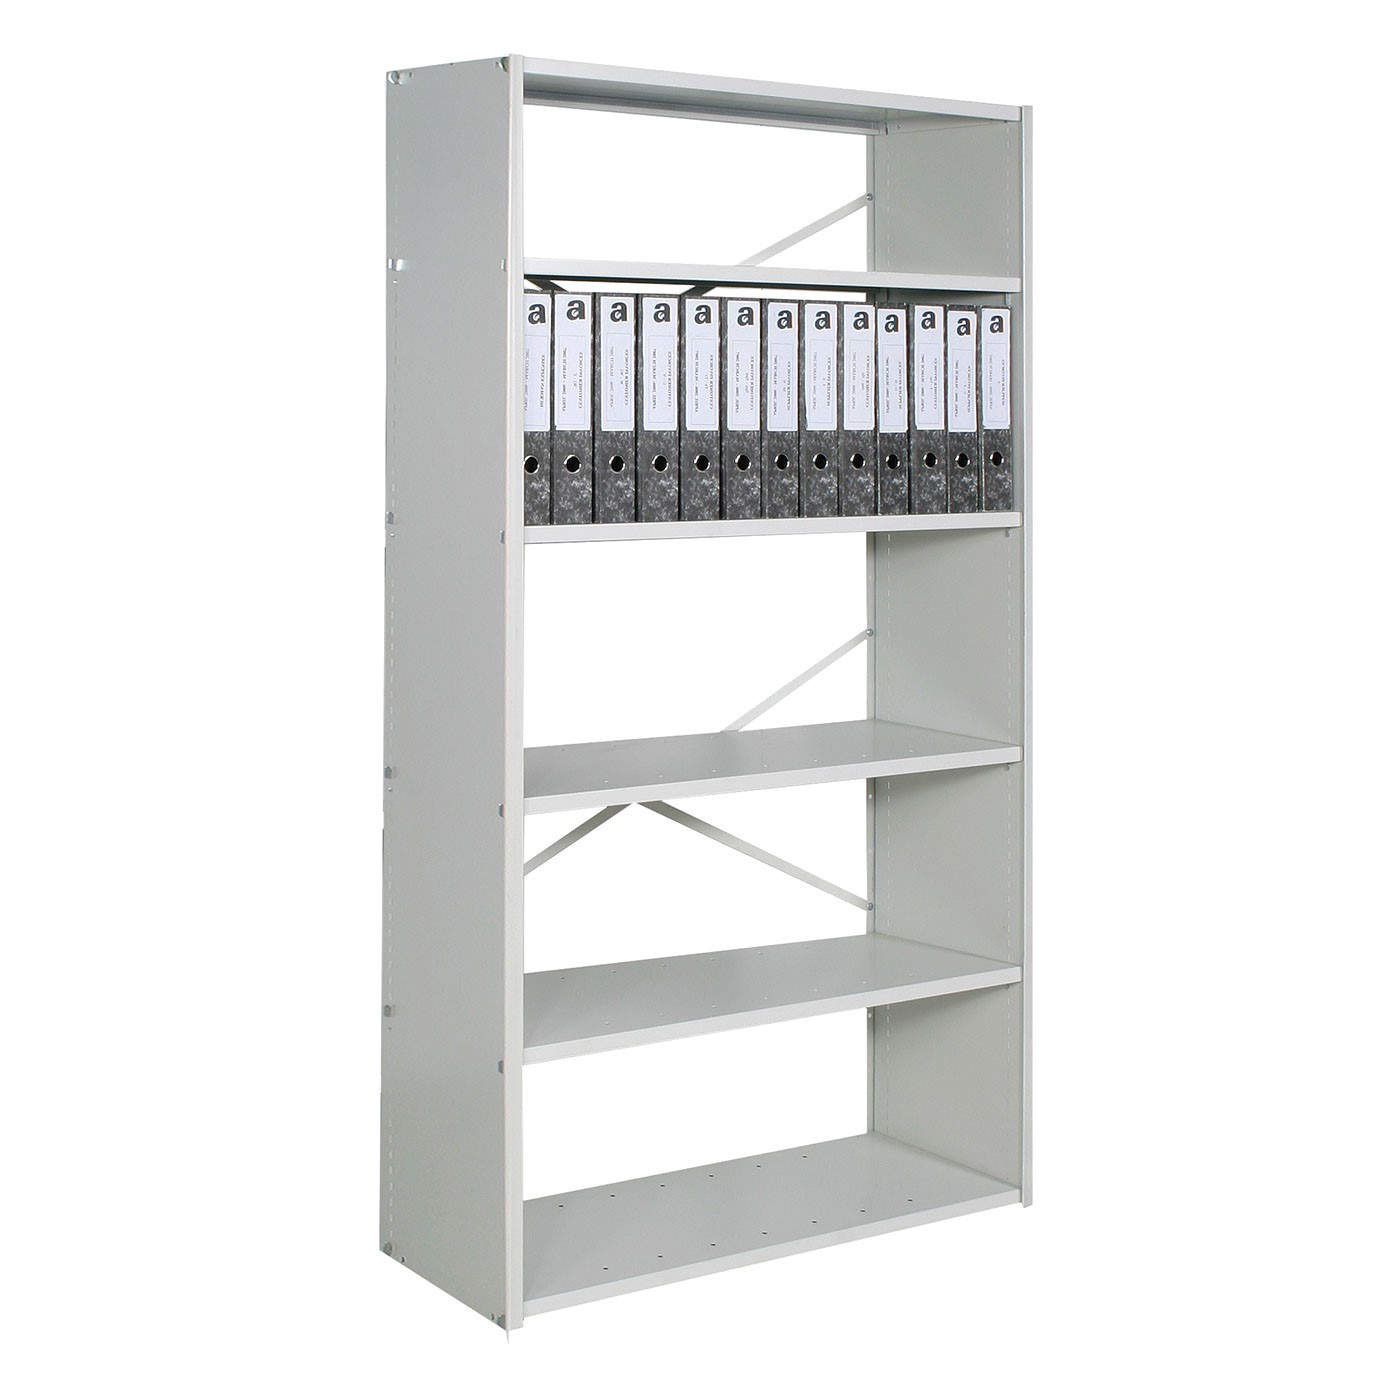 Robust Office Storage Racking The, Office Shelving Units